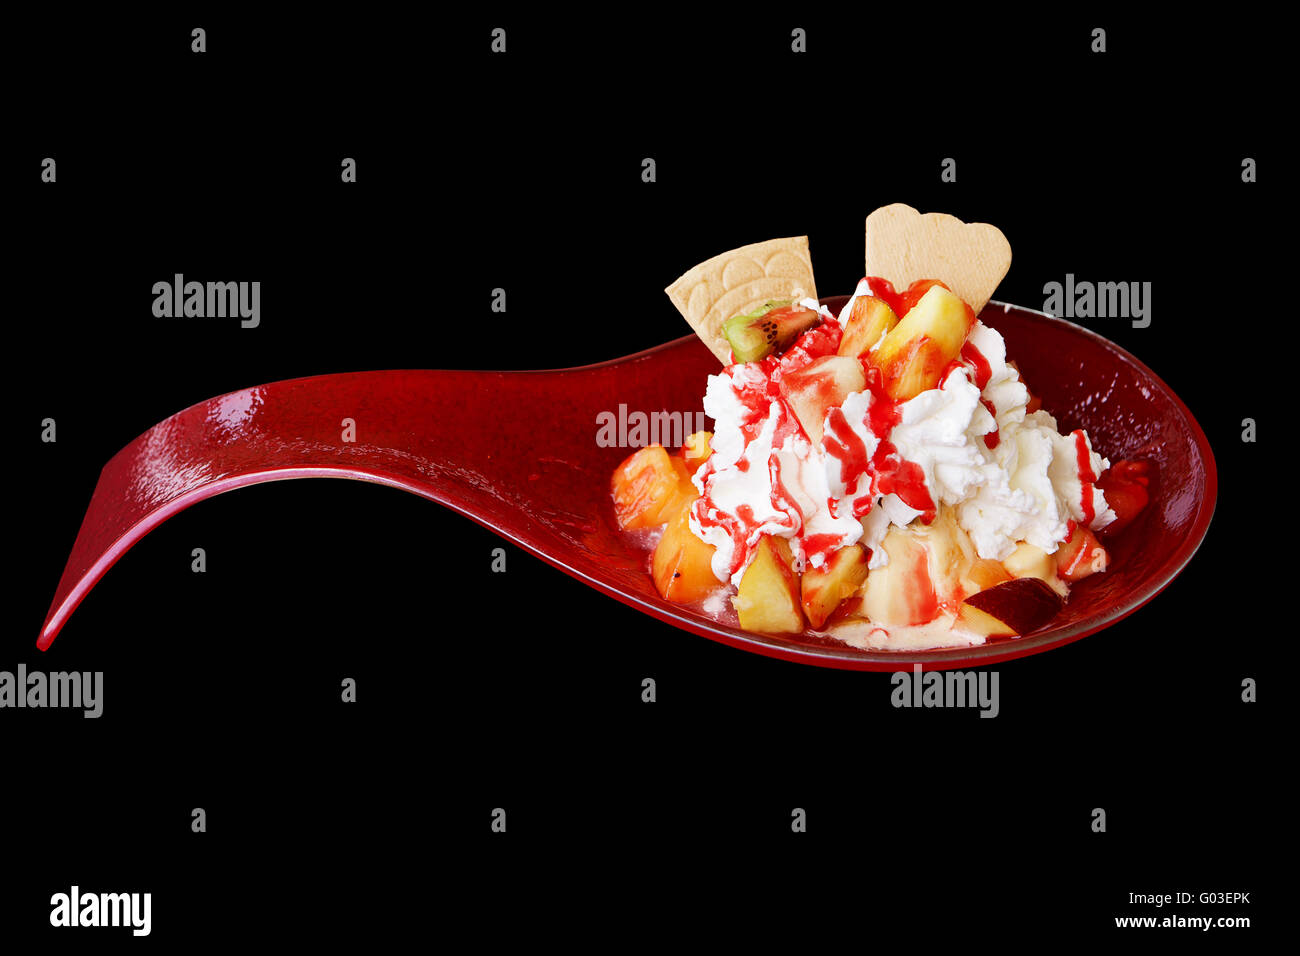 Ice-cream with fruit, cookies in a red spoon Stock Photo